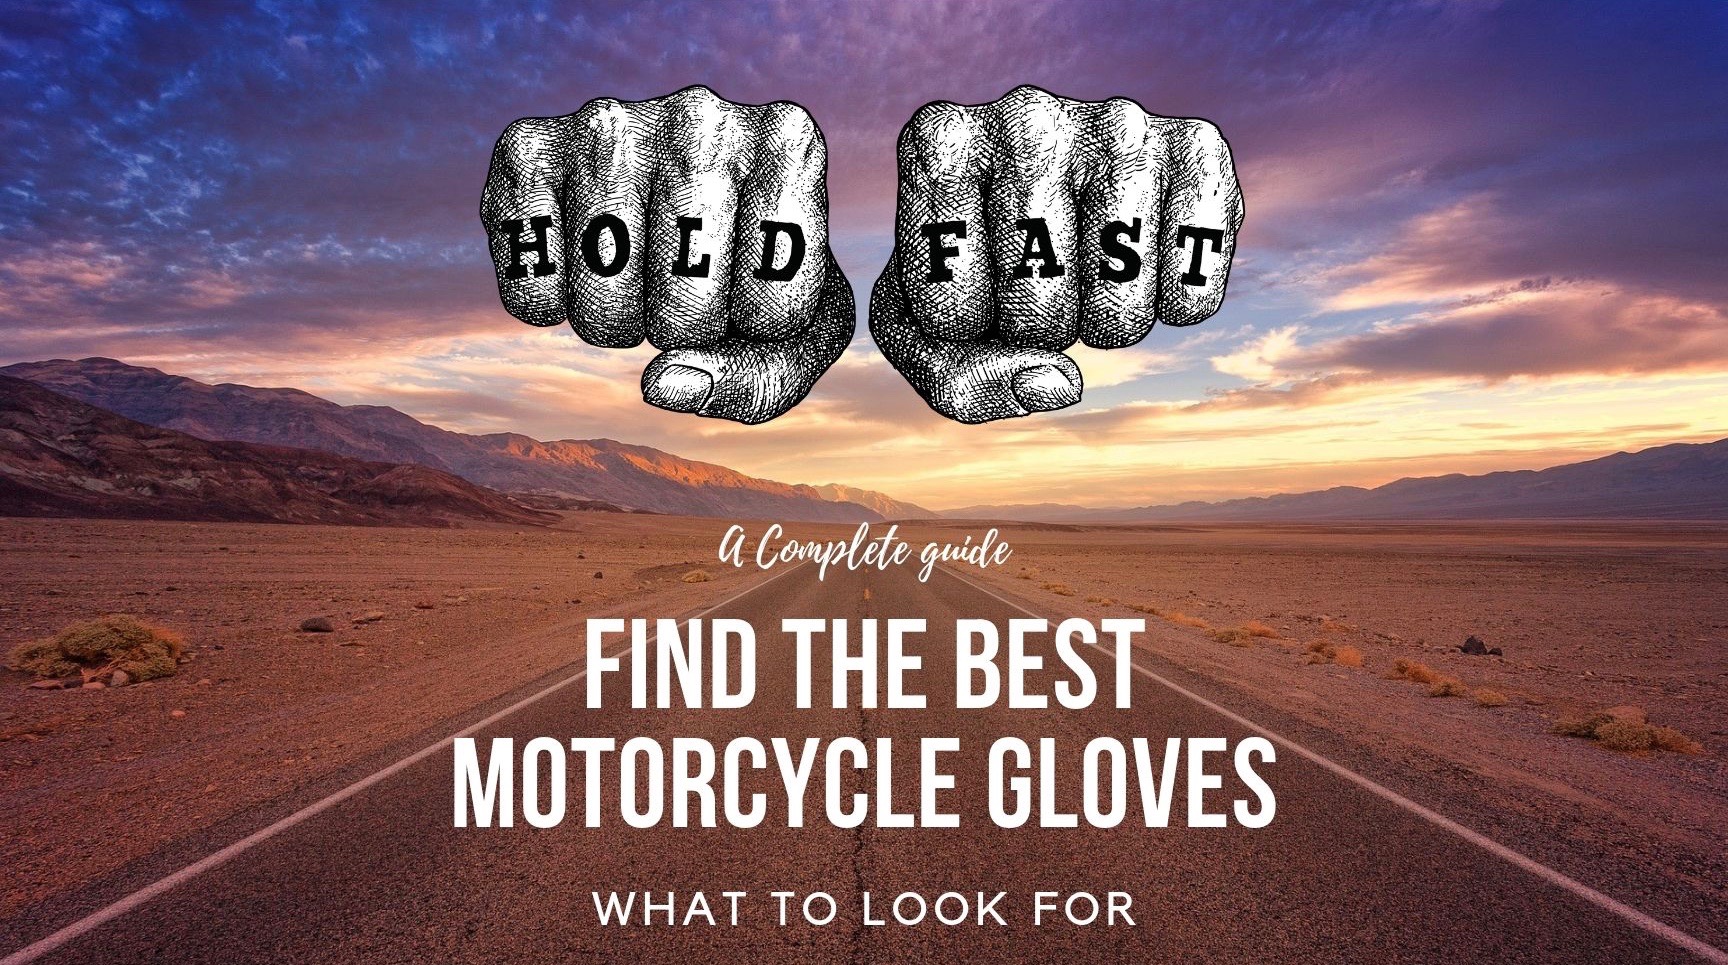 Find the best motorcycle gloves